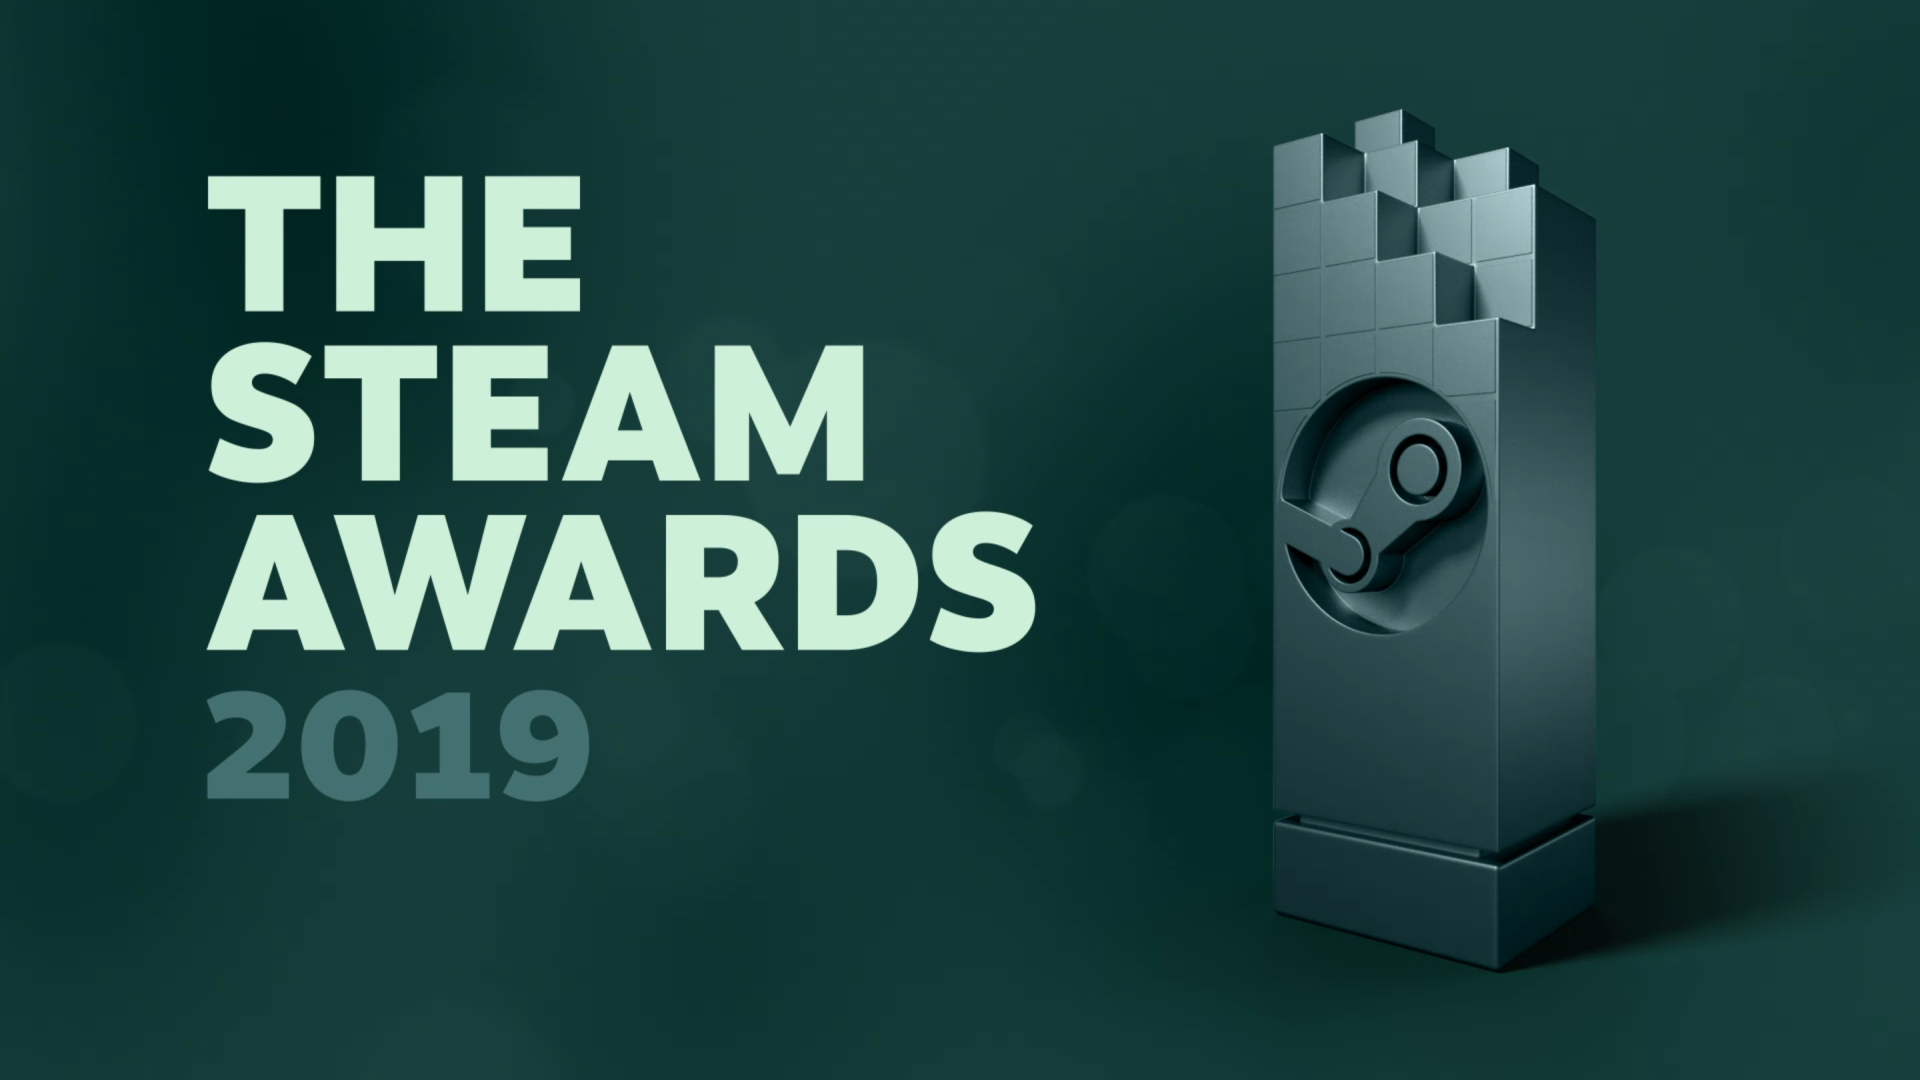 The Steam Awards 2019